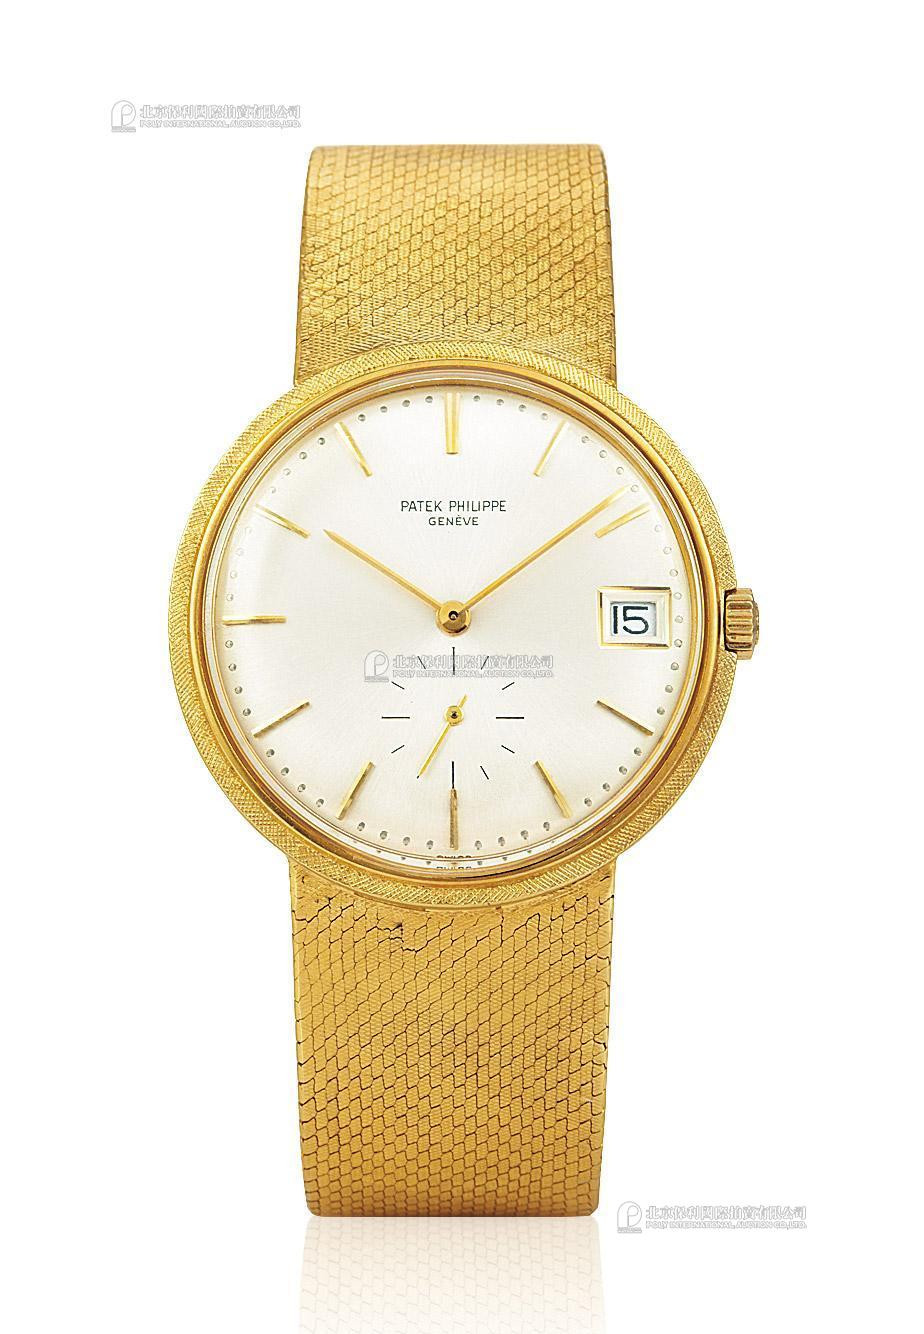 PATEK PHILIPPE A YELLOW GOLD AUTOMATIC WRISTWATCH WITH DATE INDICATION